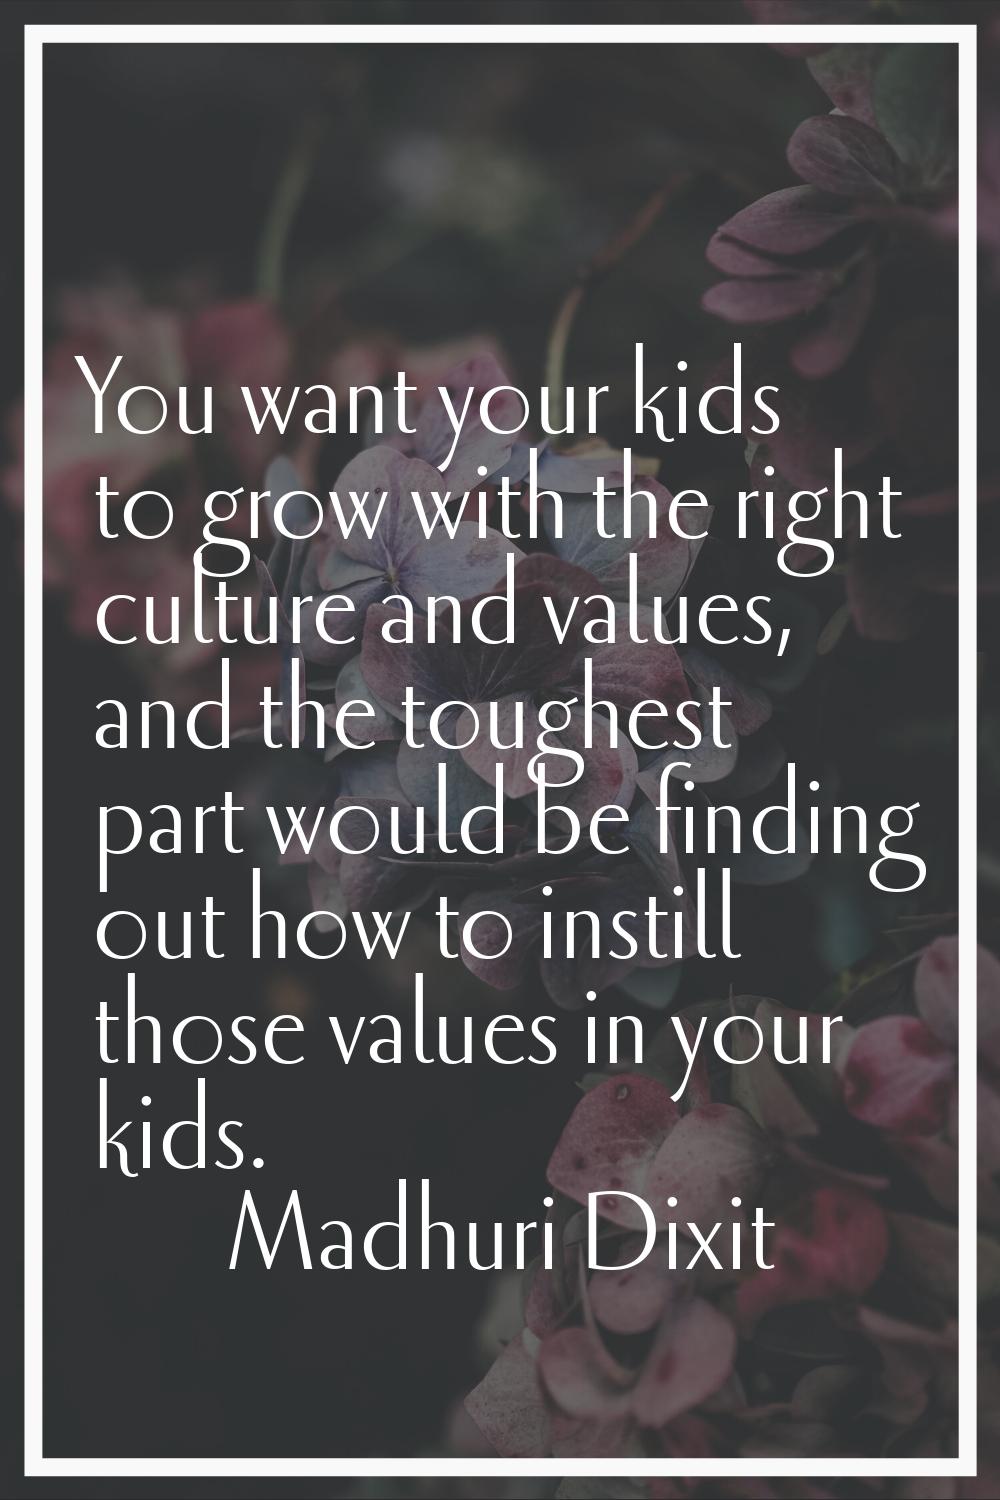 You want your kids to grow with the right culture and values, and the toughest part would be findin